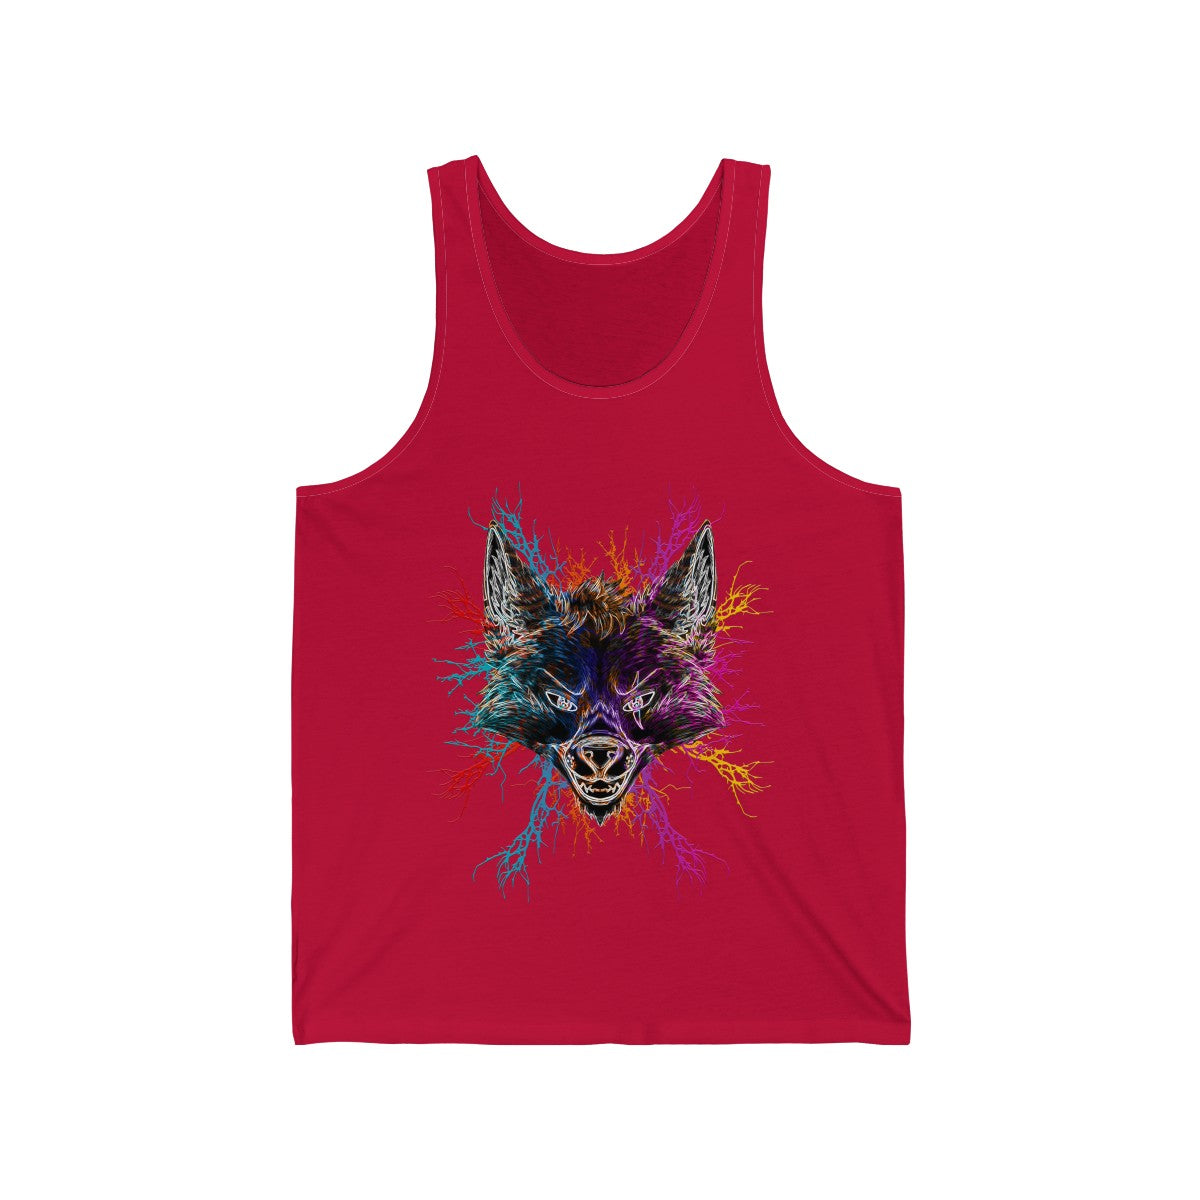 Paint Me Good - Tank Top Tank Top Corey Coyote Red XS 